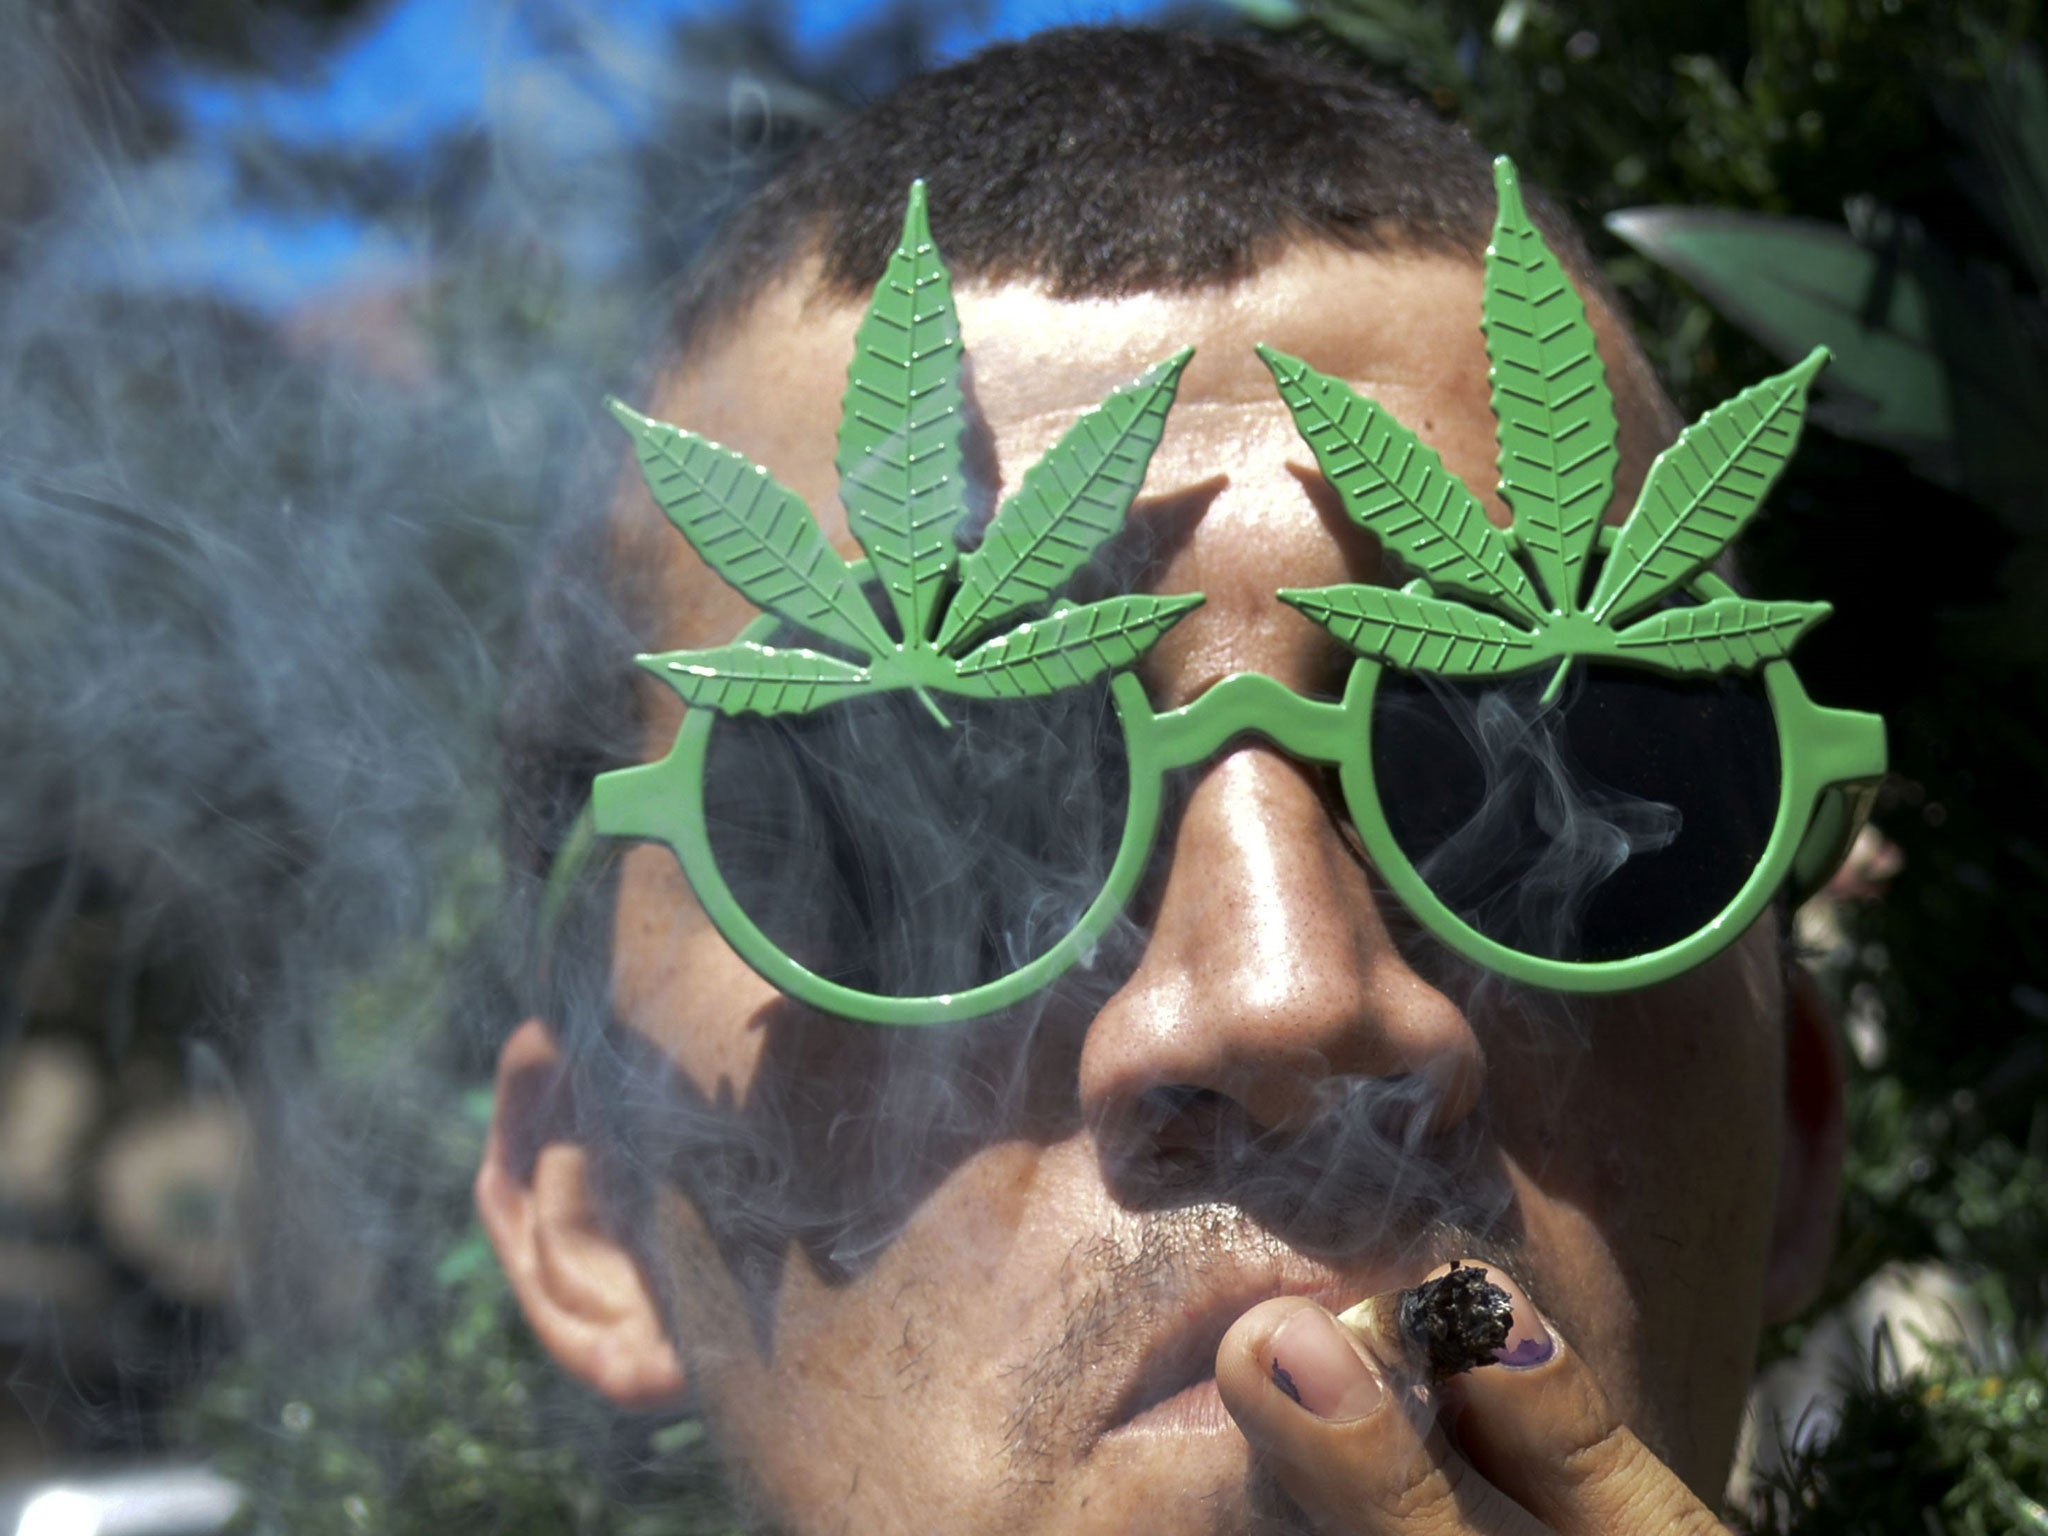 A man smokes marijuana during the World Day for the Legalization of Marijuana in Medellin, Antioquia department, Colombia on May 3, 2014.